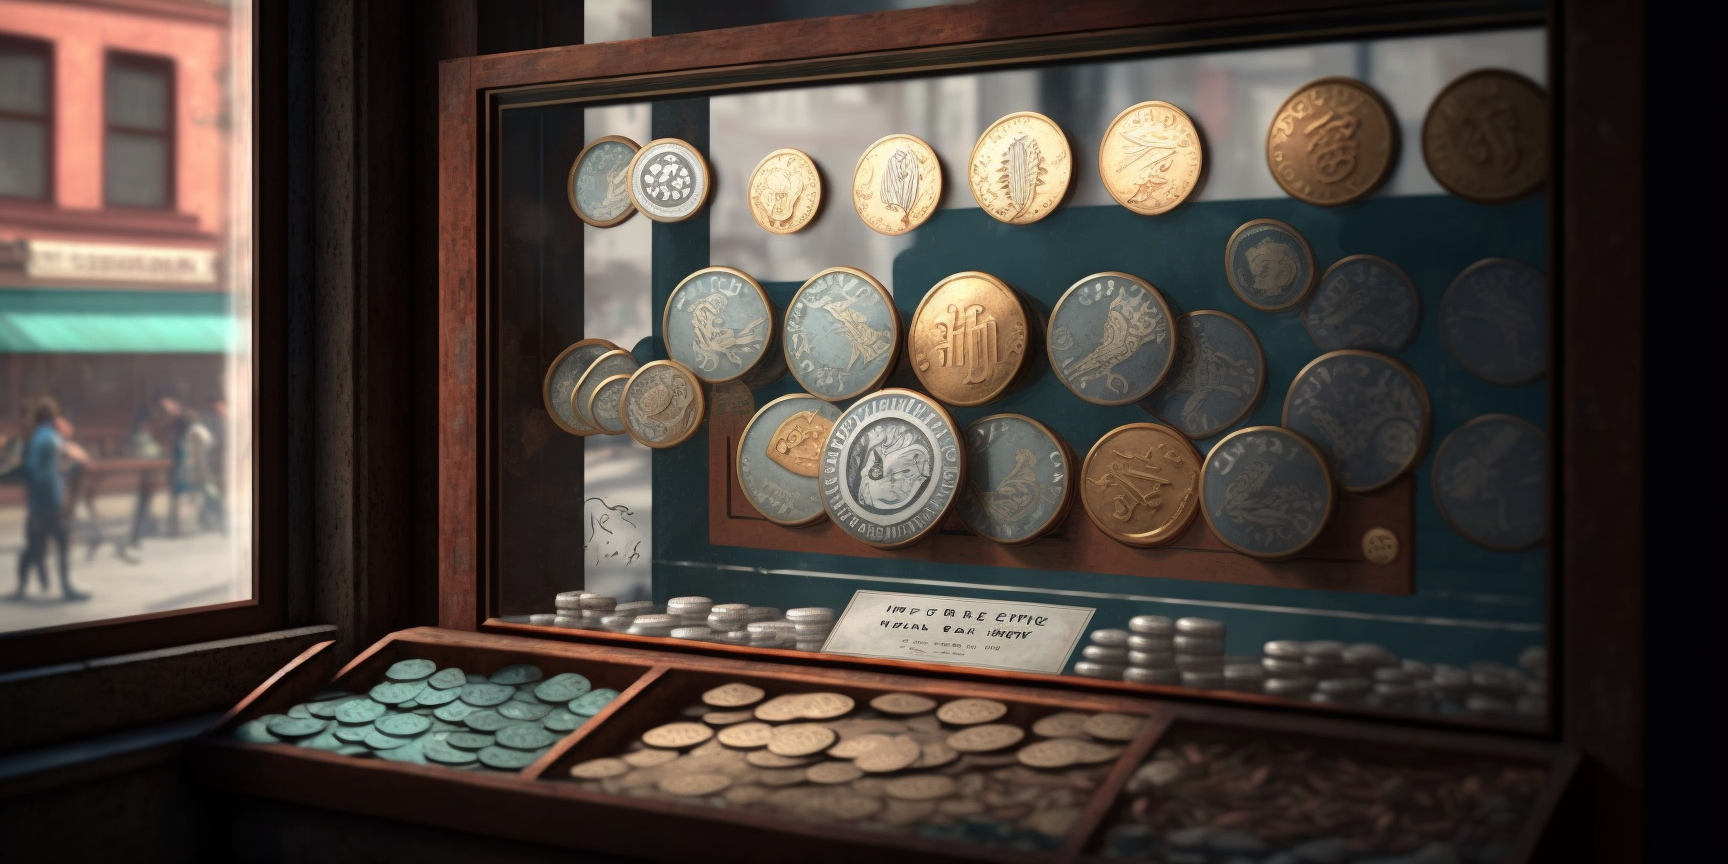 A shop window with coins